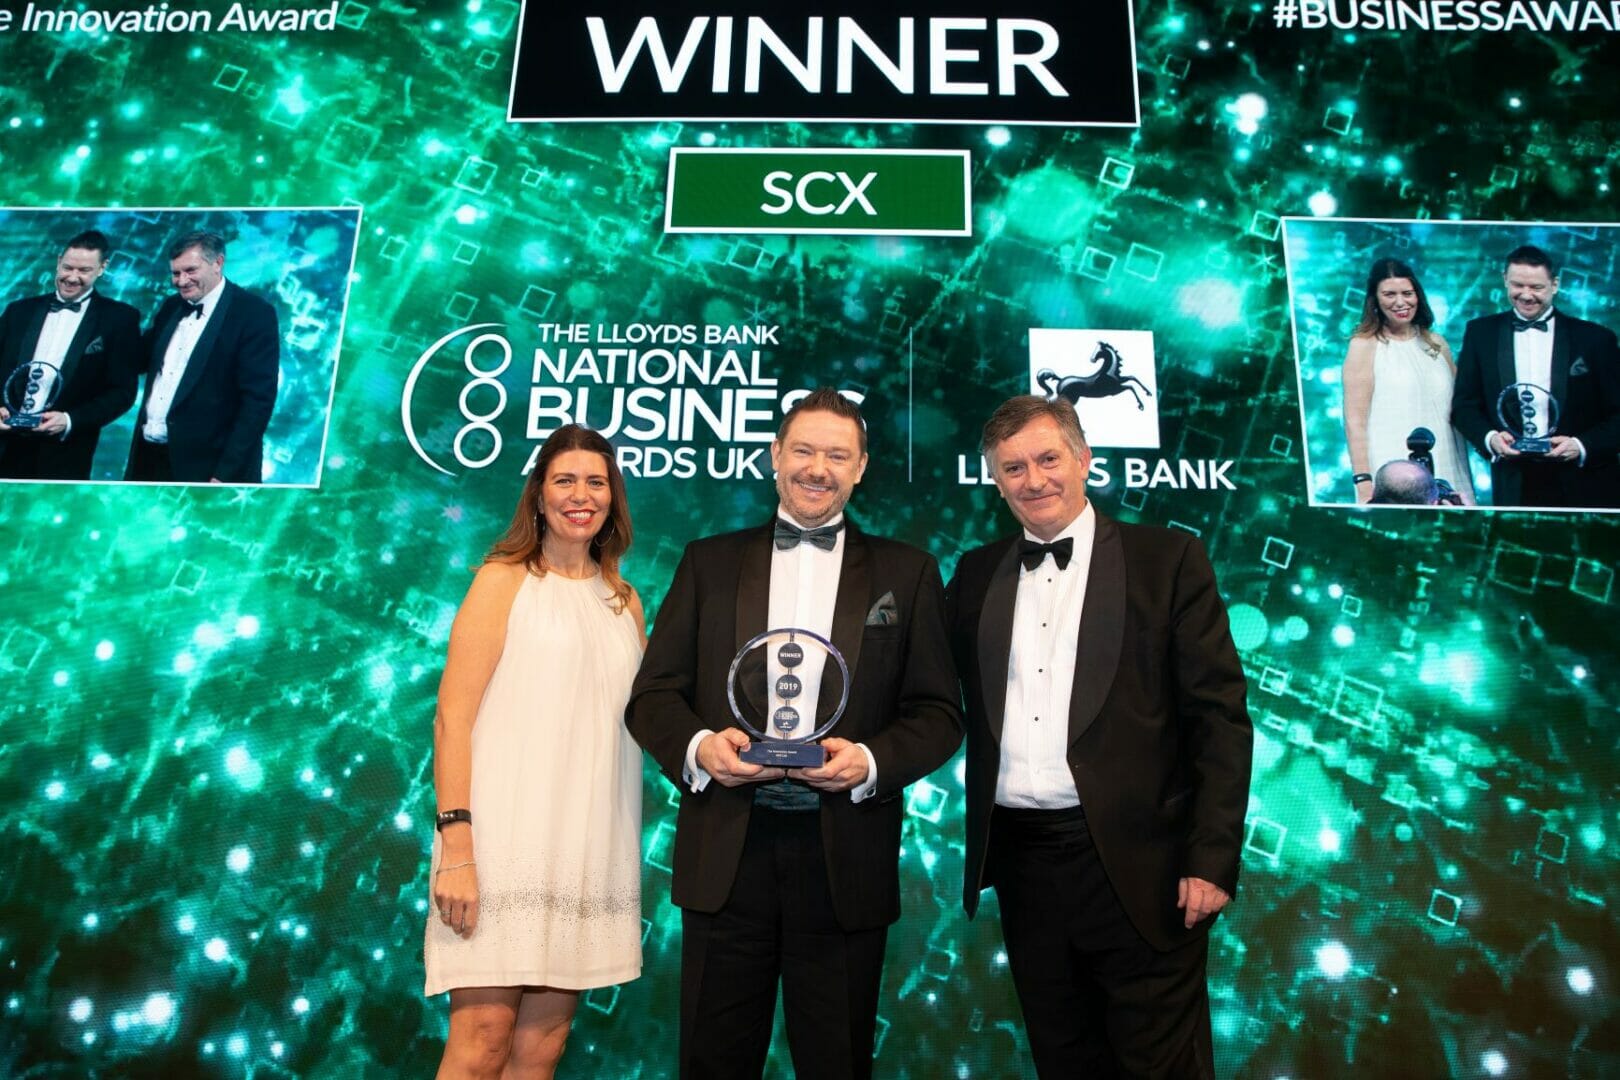 Sheffield engineering firm scoops ‘Best of British’ innovation award – its biggest ever honour   @TheSCXGroup